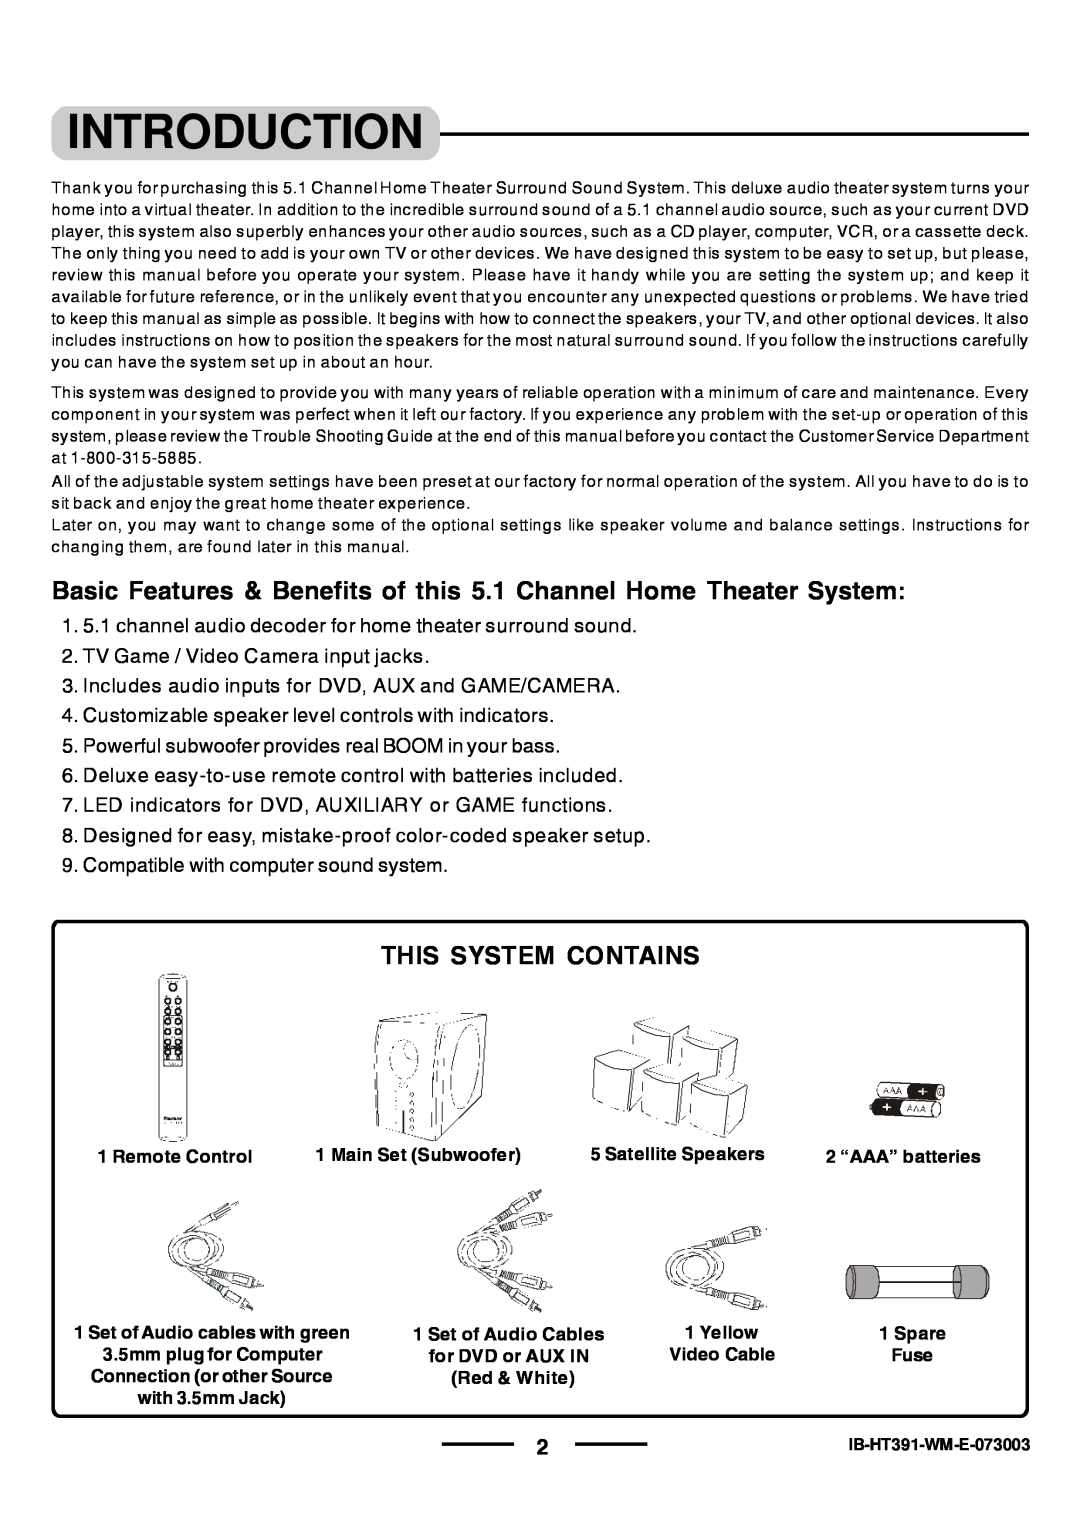 Lenoxx Electronics HT-391 manual Introduction, This System Contains 